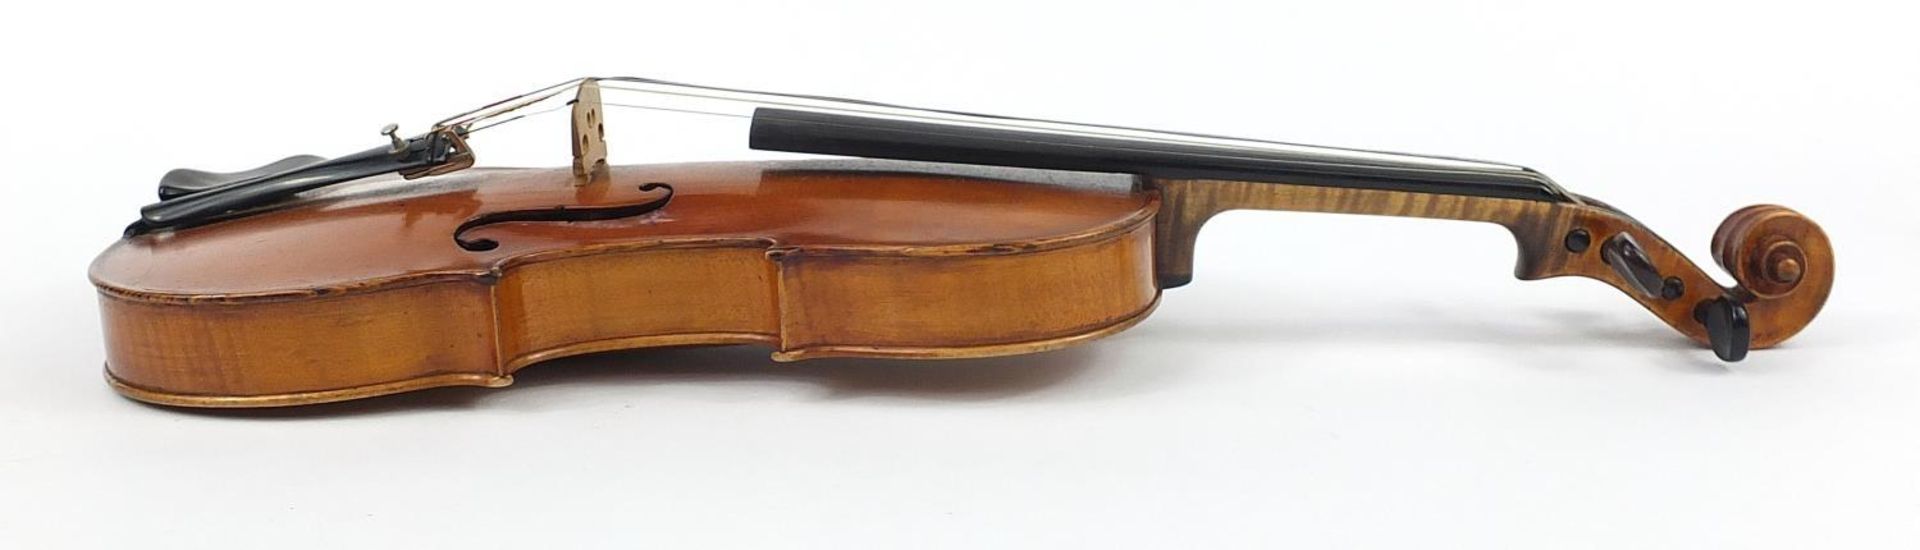 Old wooden violin bearing an Andre Castagneri paper label, the violin back 14 inches in length - Bild 4 aus 10